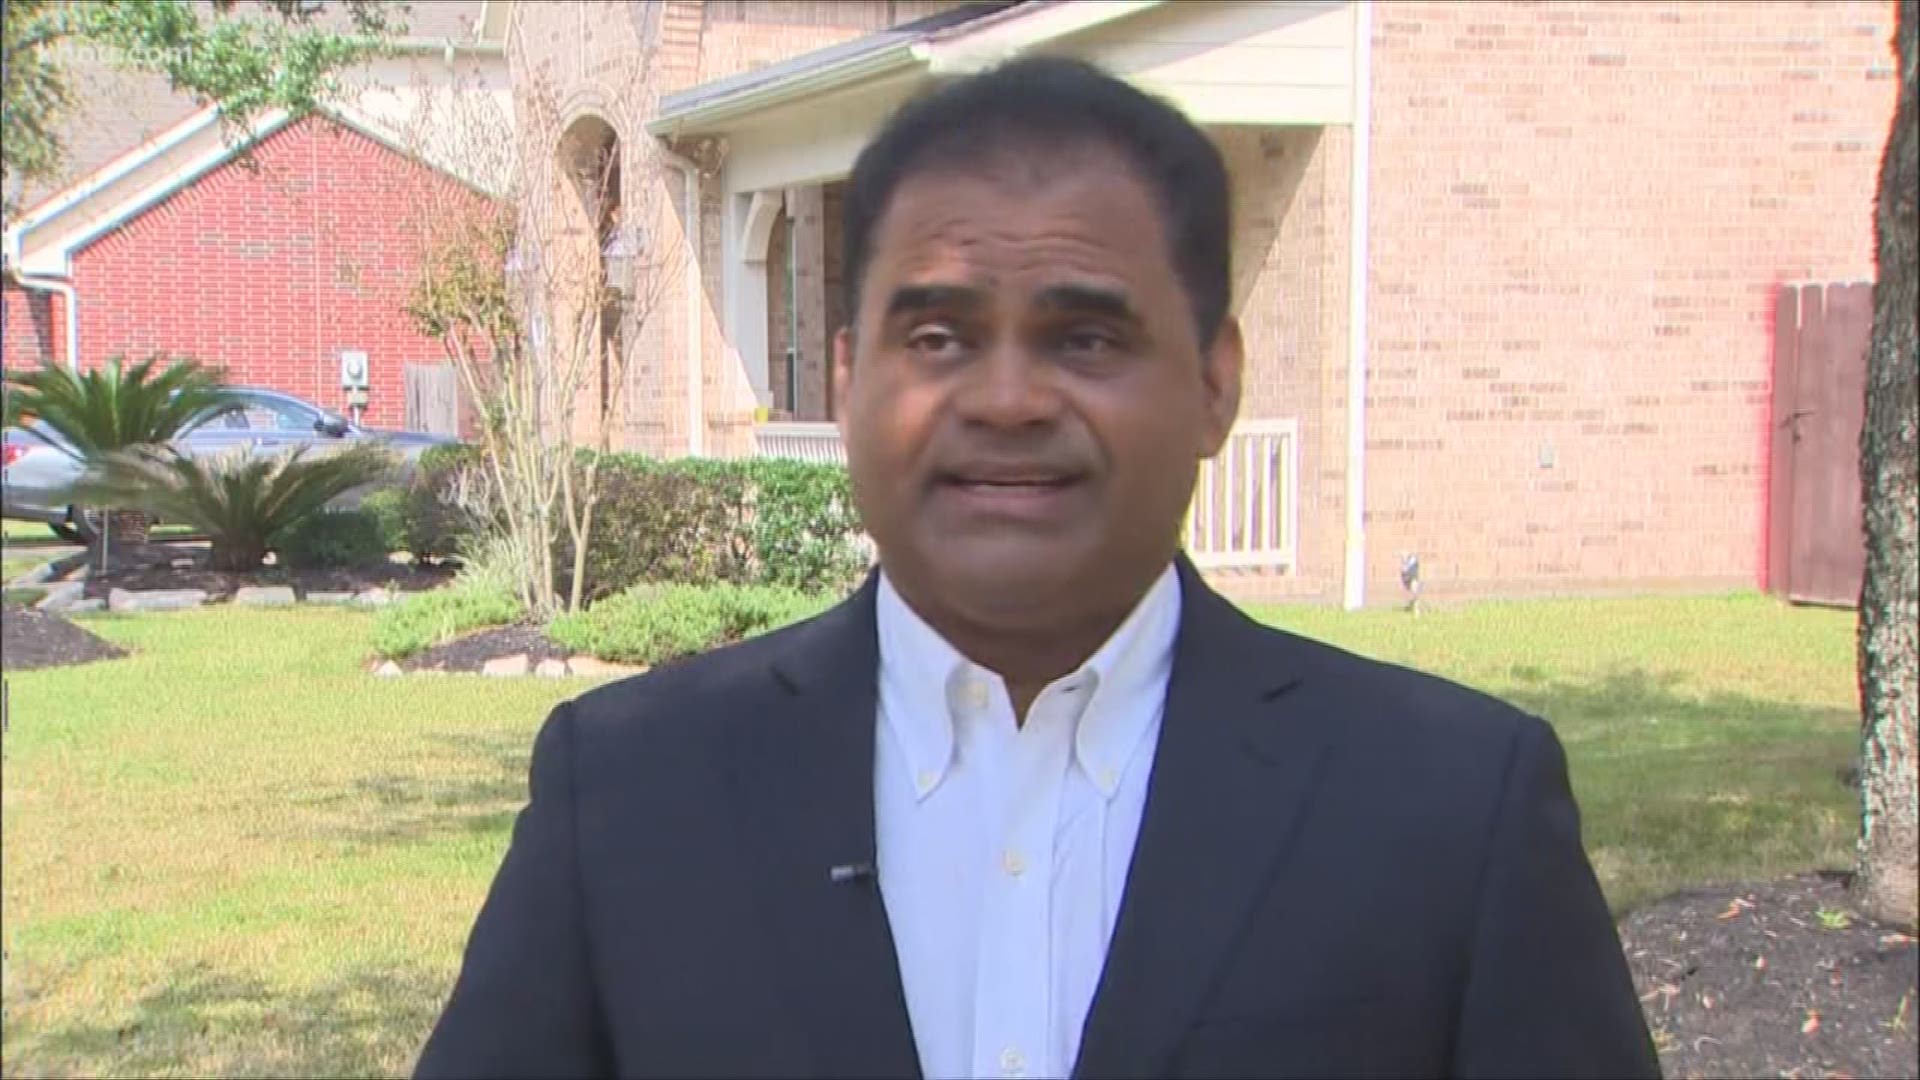 Fort Bend County Judge elect says win reflects diversity khou com